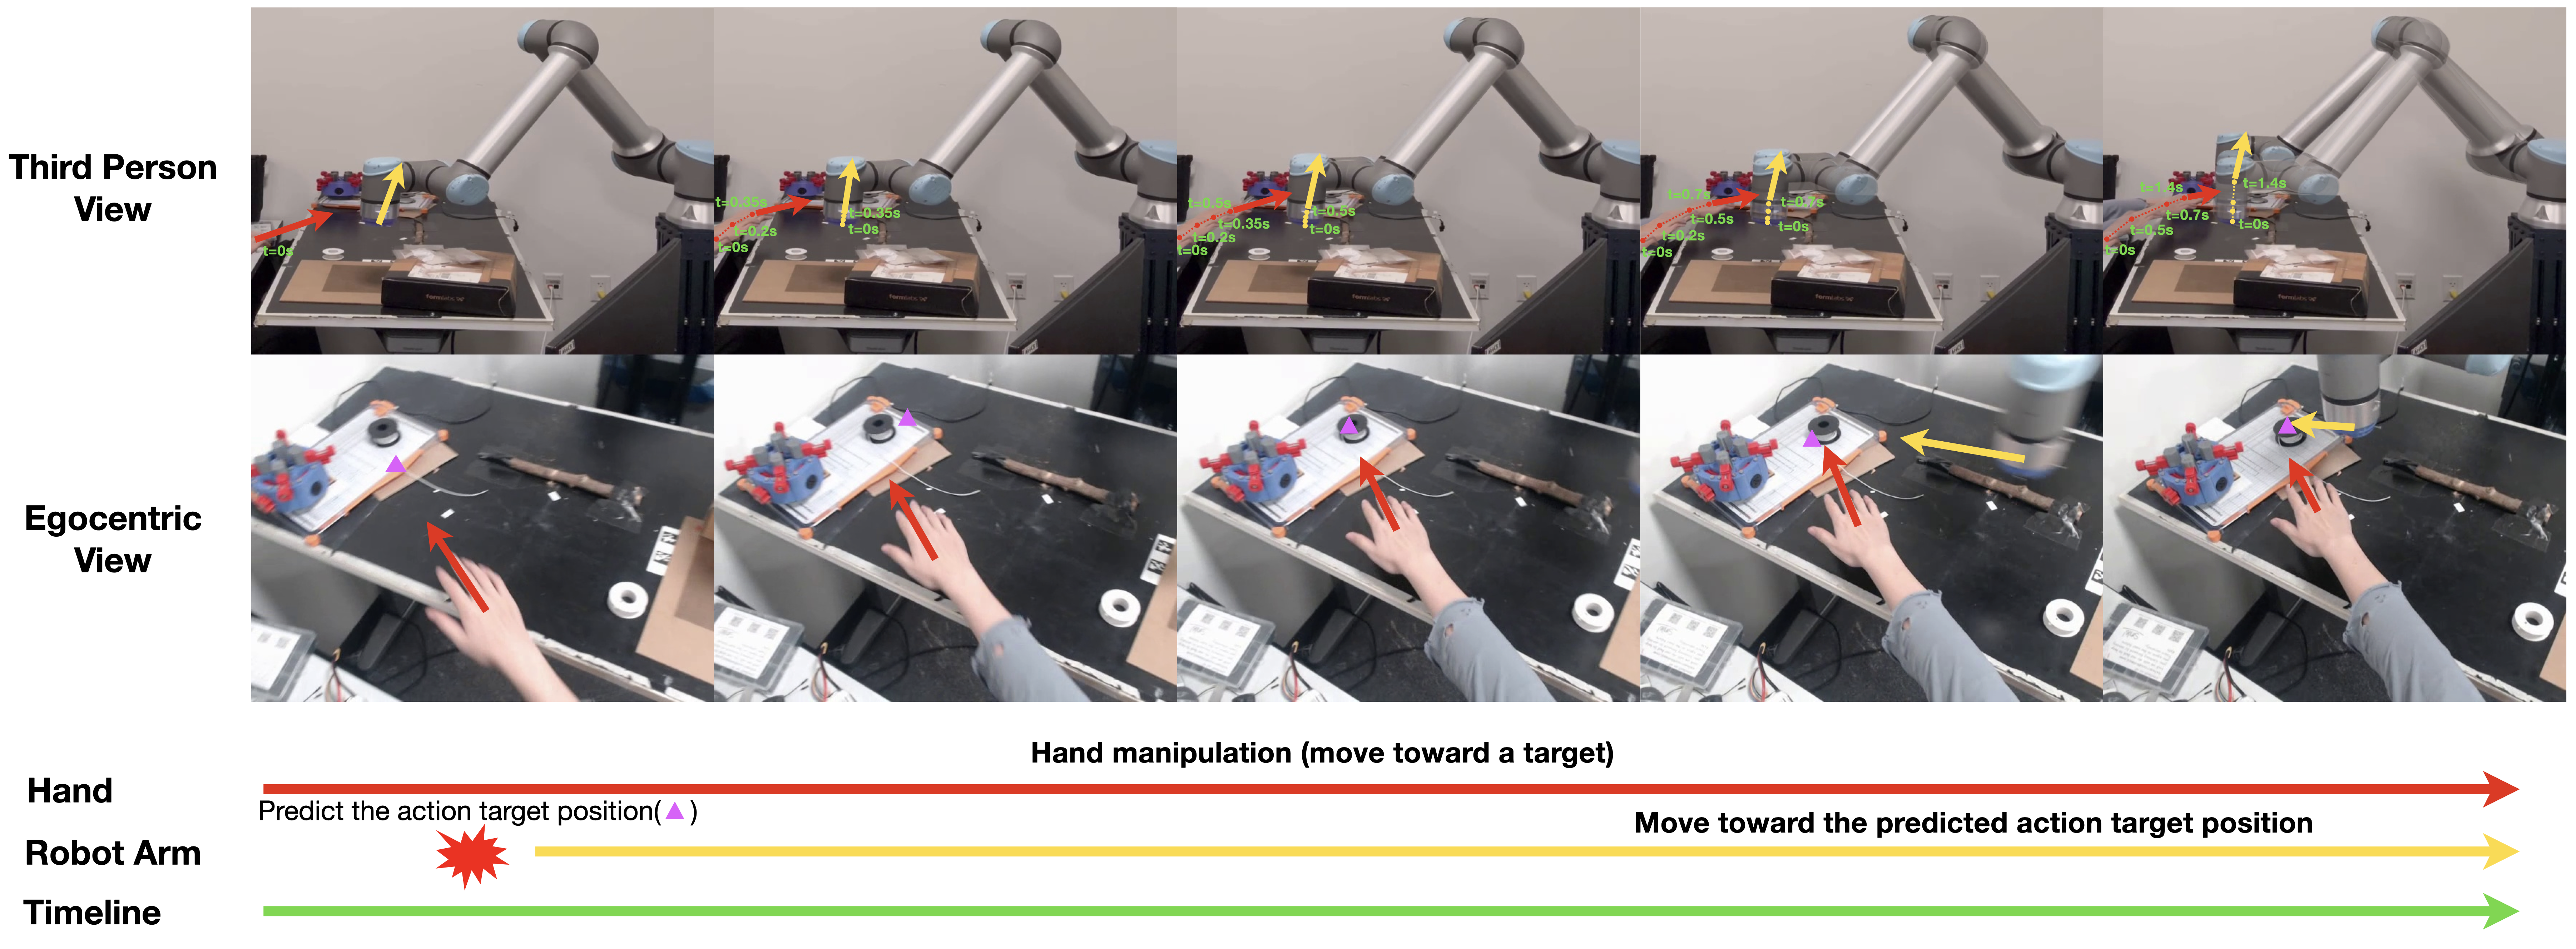 EgoPAT3Dv2: Predicting 3D Action Target from 2D Egocentric Vision for Human-Robot Interaction